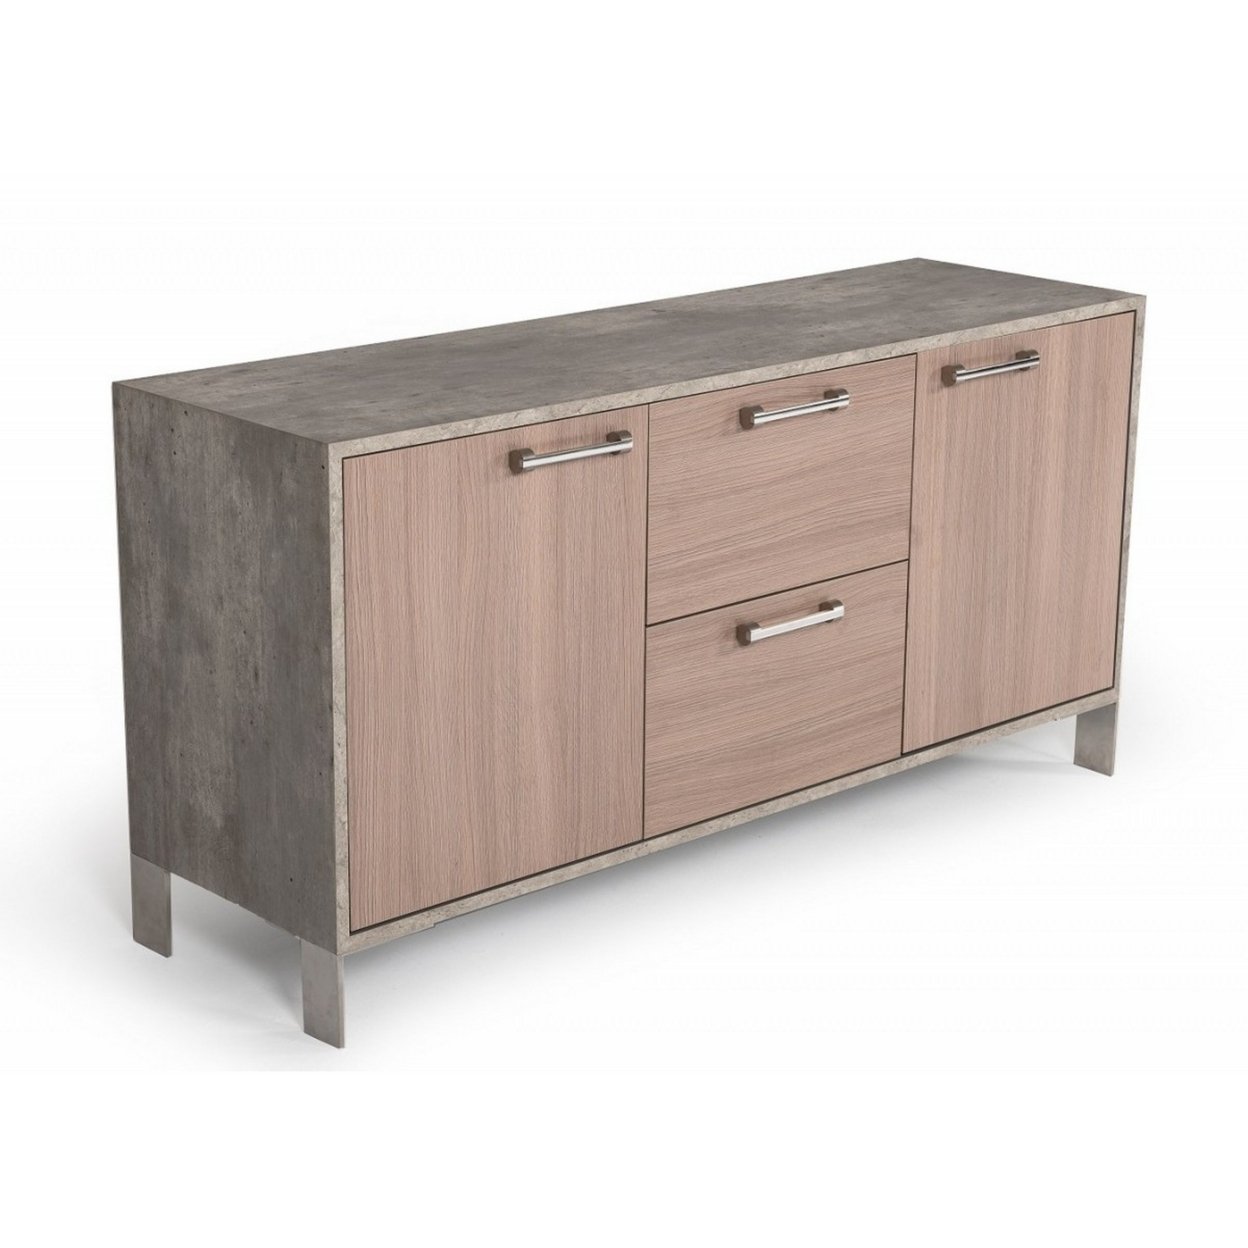 2 Door Buffet With Faux Concrete Top And 2 Drawers, Brown And Gray- Saltoro Sherpi